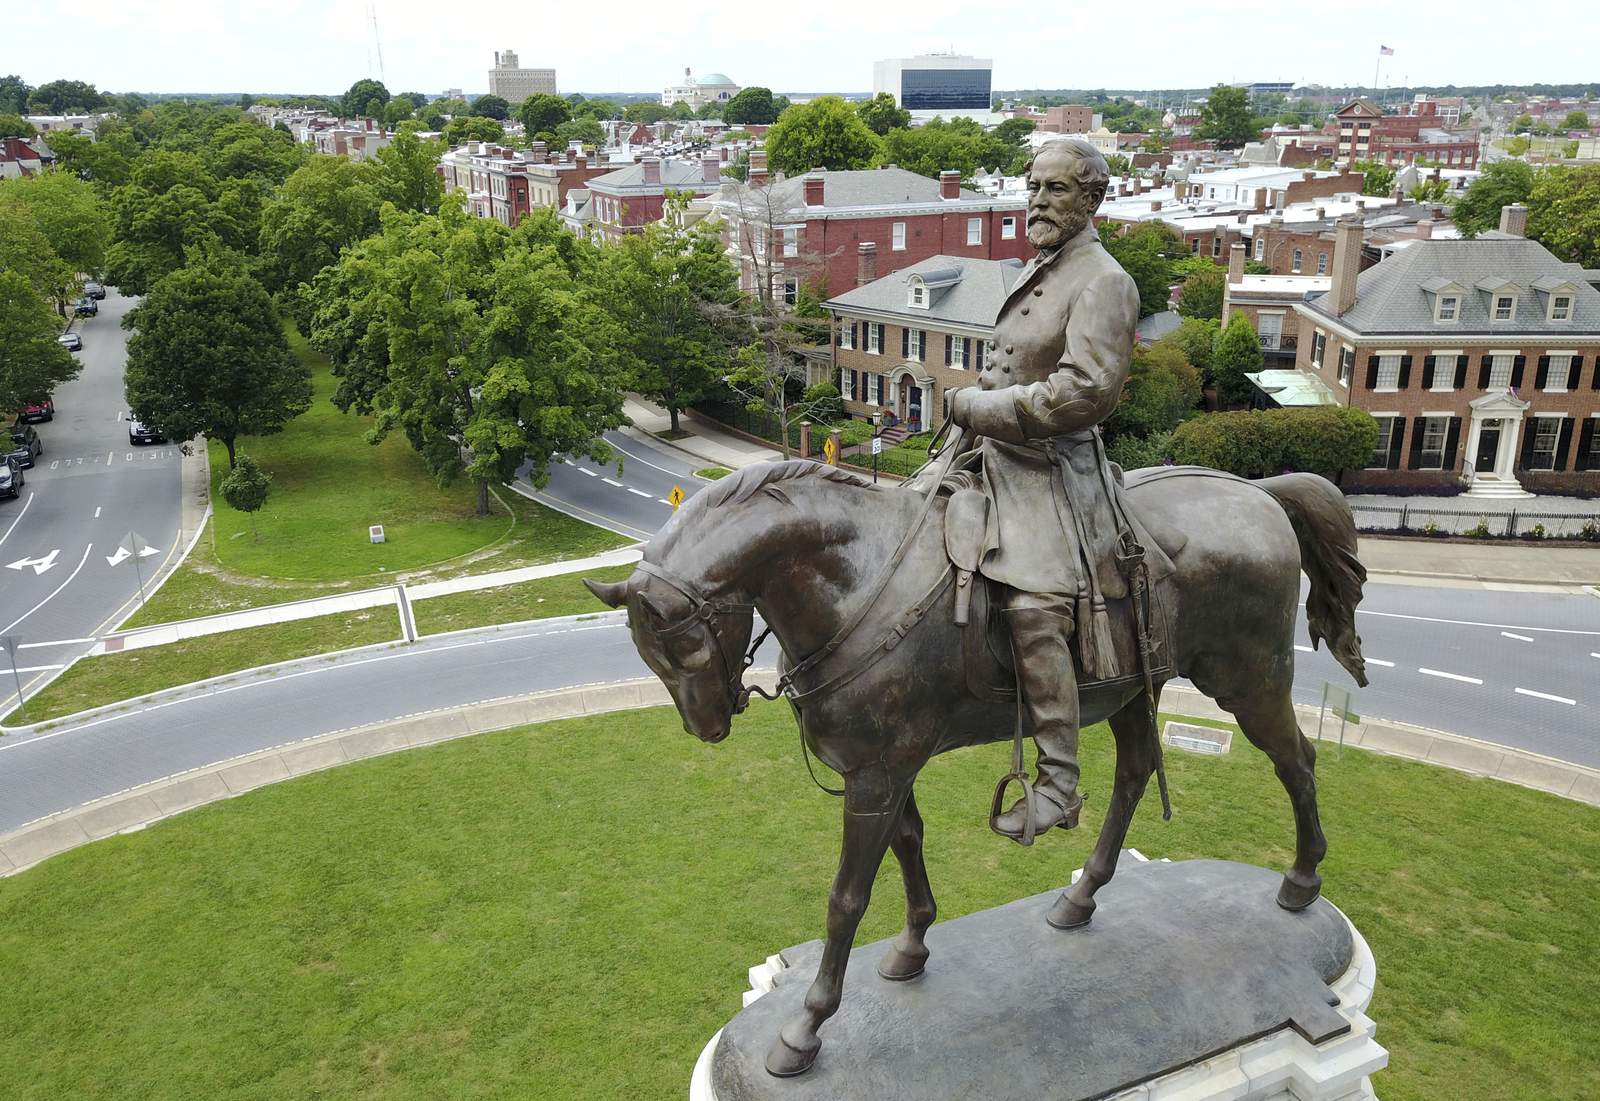 Robert E. Lee statue becomes epicenter of protest movement